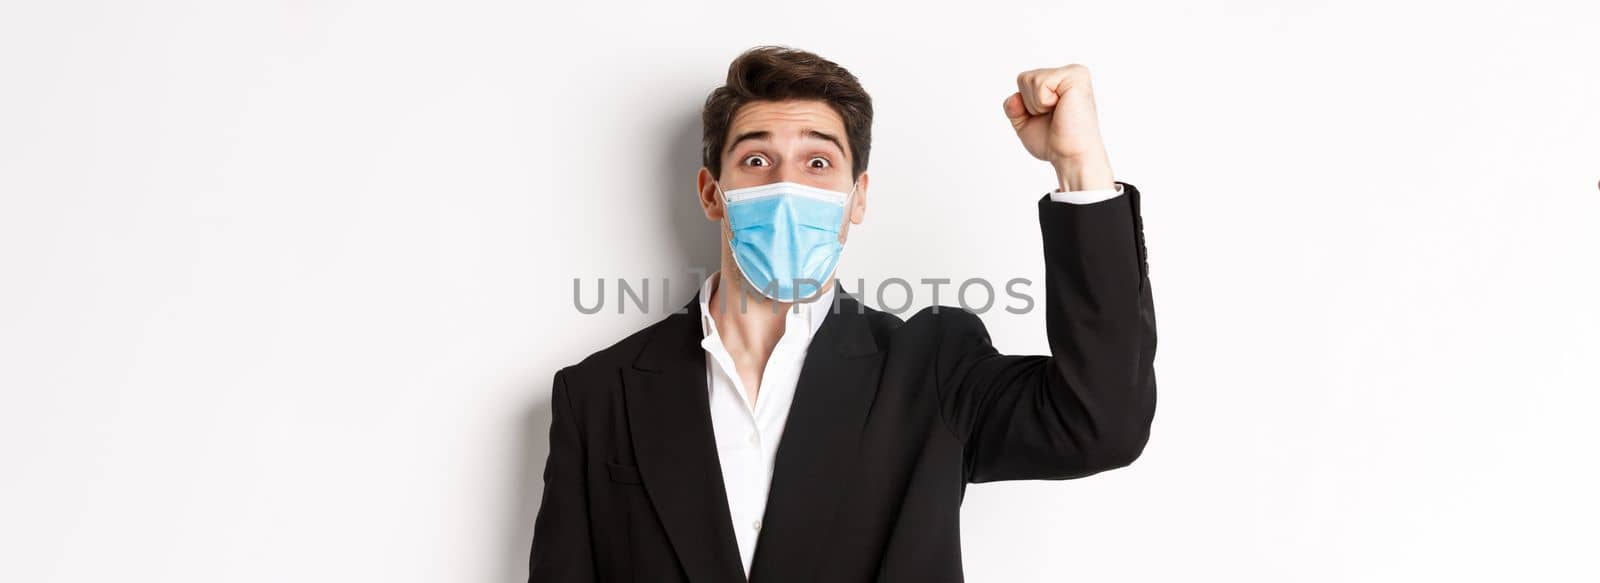 Concept of covid-19, business and social distancing. Close-up of excited businessman in medical mask and suit, rejoicing, achieving goal and triumphing, white background.